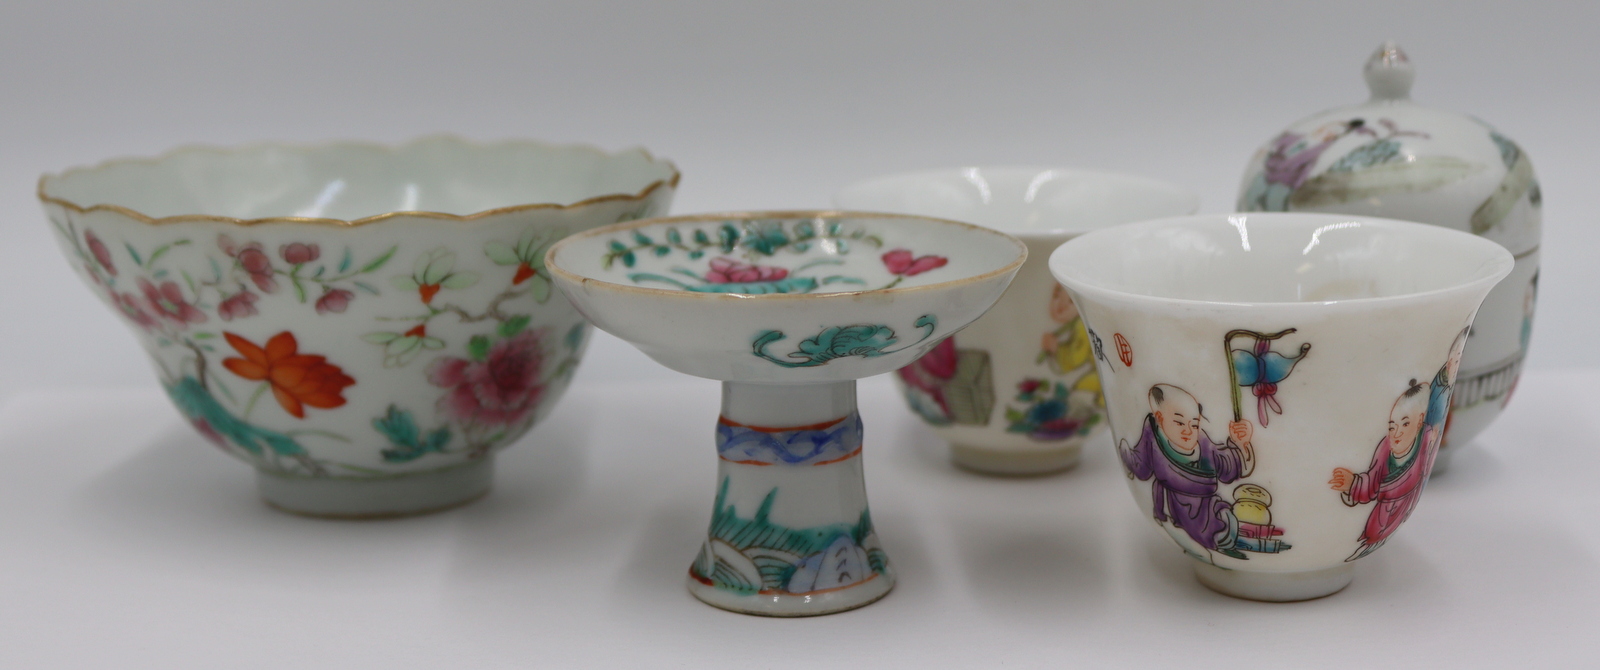 GROUPING OF CHINESE REPUBLIC PORCELAIN